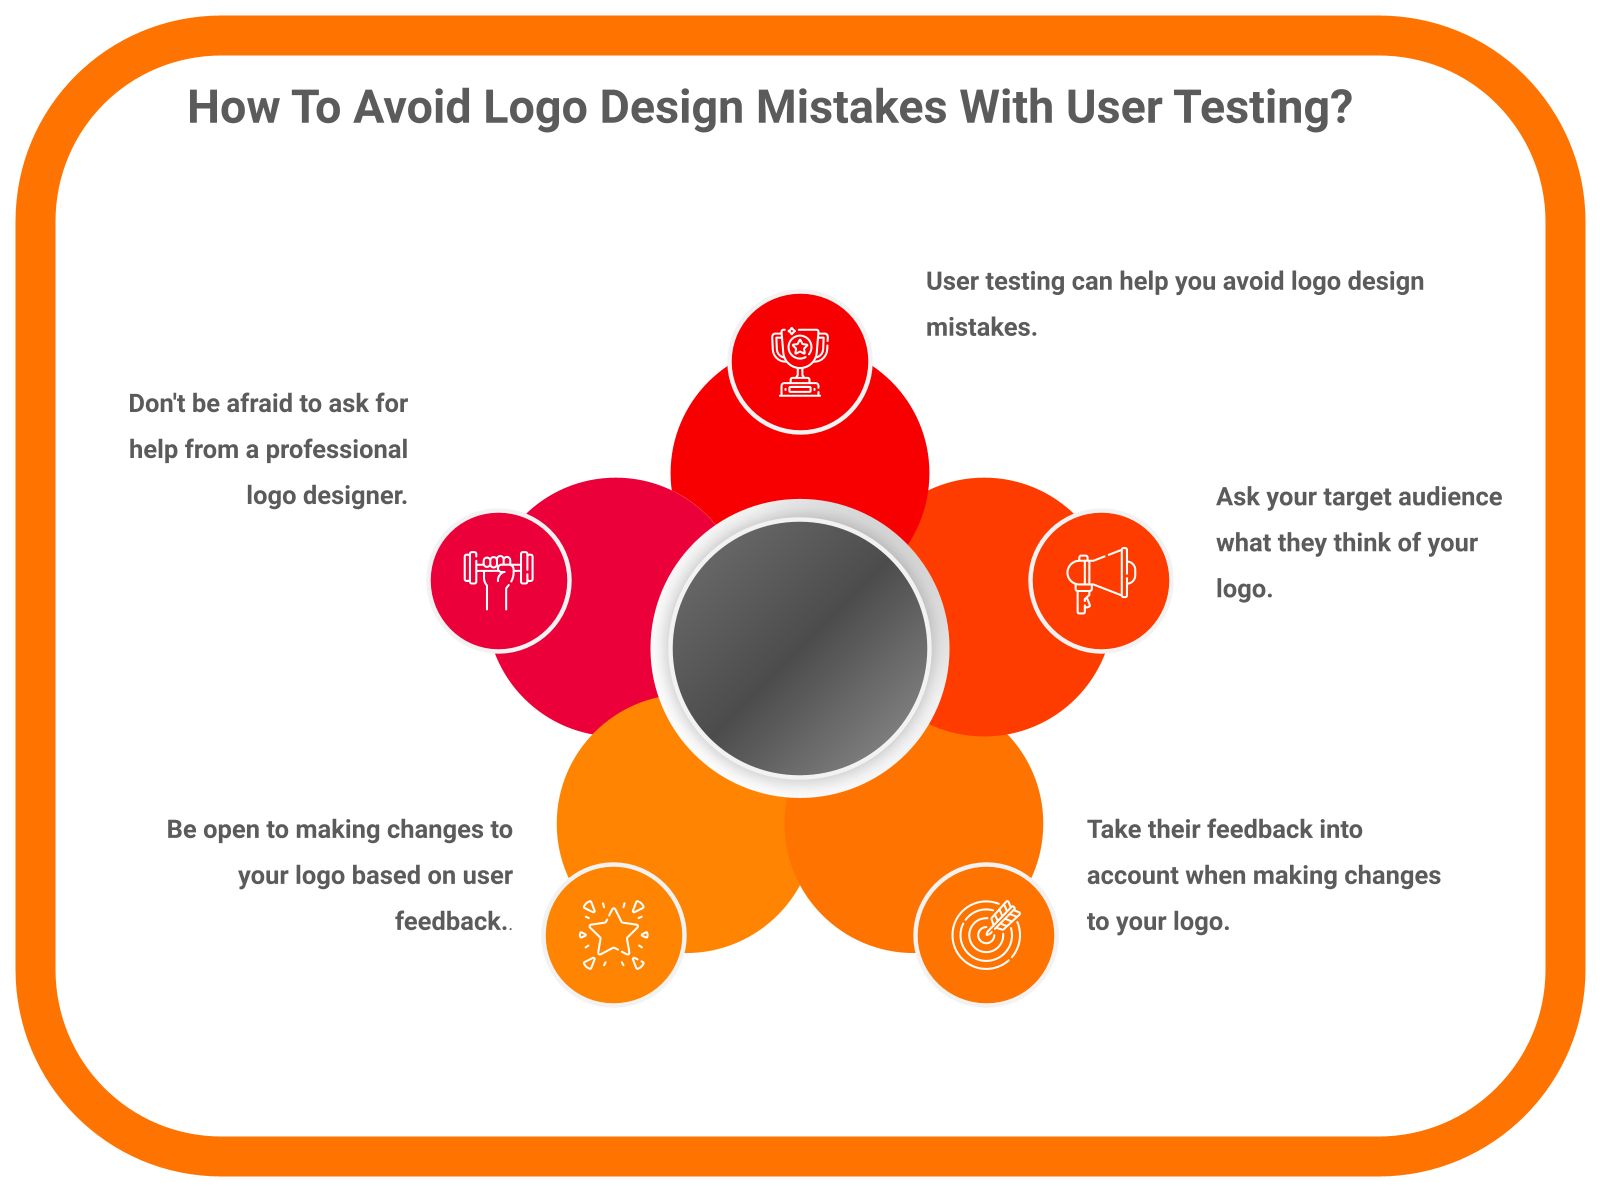 How To Avoid Logo Design Mistakes With User Testing?